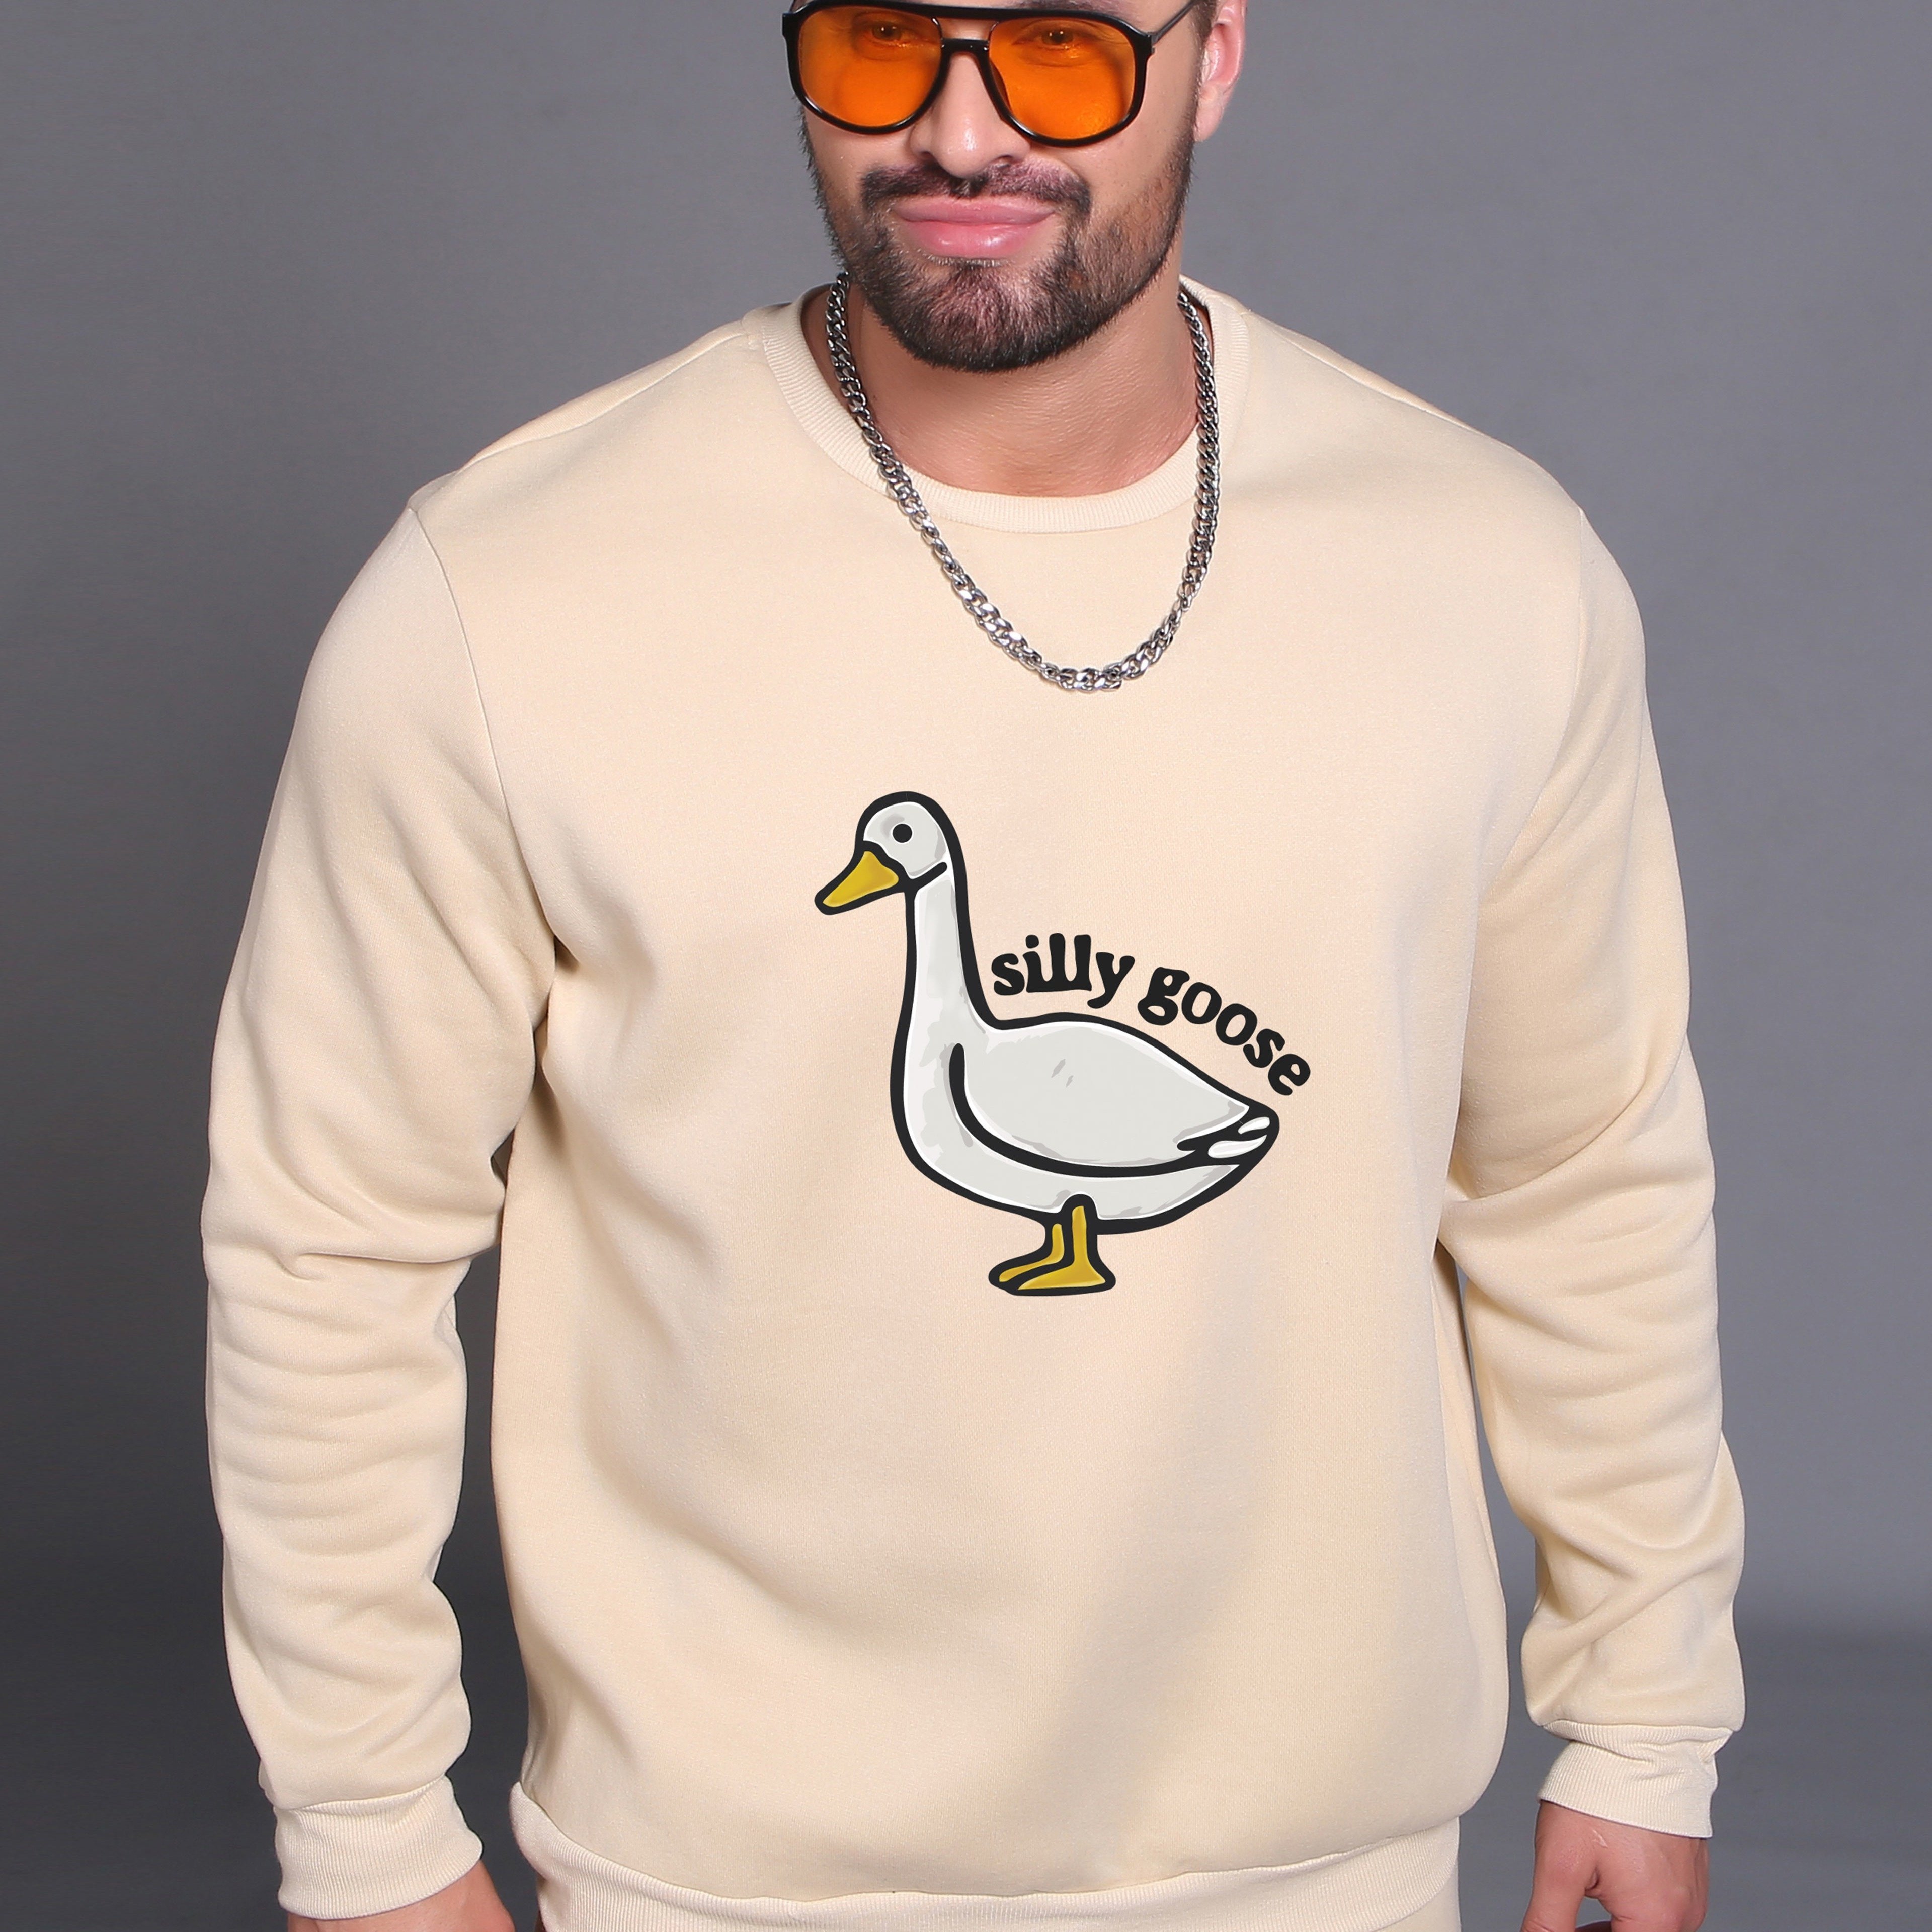 

Silly Goose Print Crew Neck Fleece Sweatshirt Warm Pullover For Men Solid Color Sweatshirts For Winter Fall Long Sleeve Tops